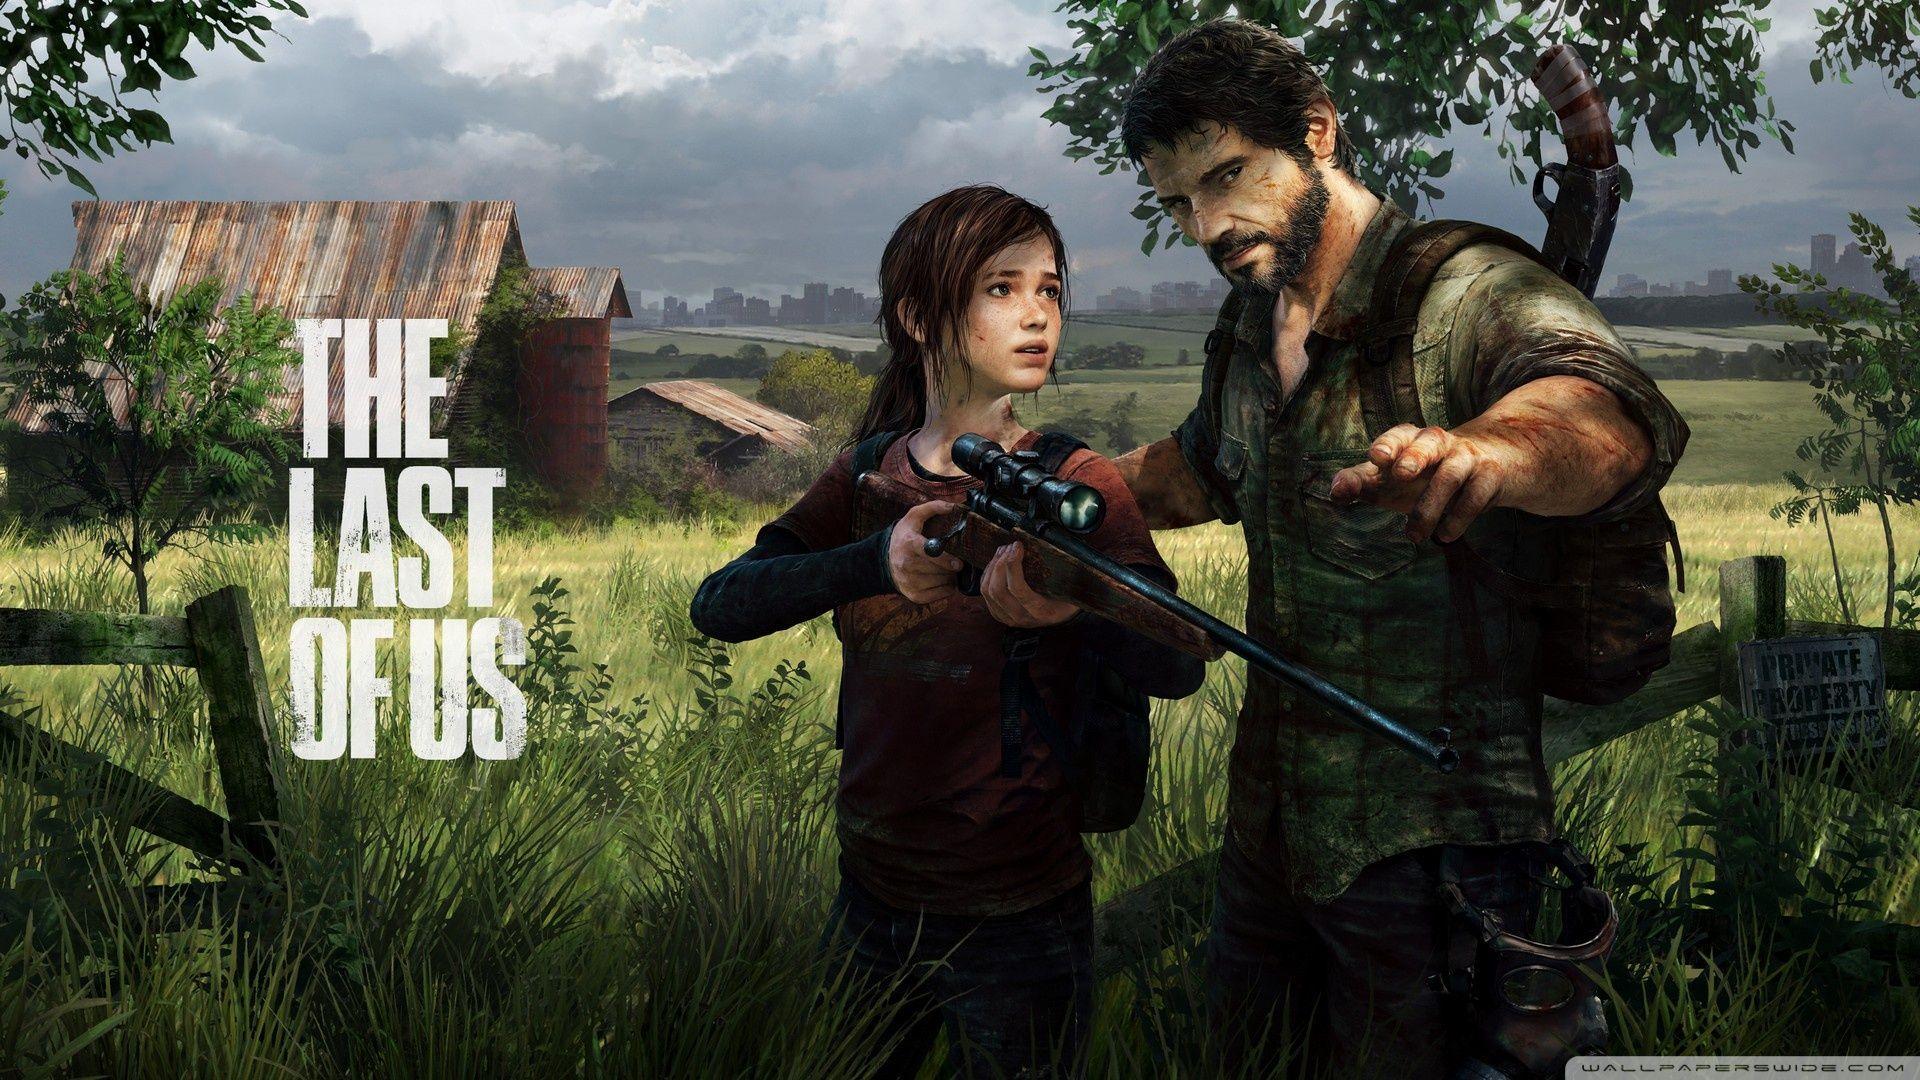 The Last Of Us (Video Game PS3) Ultra HD Desktop Background Wallpaper for 4K UHD TV, Tablet